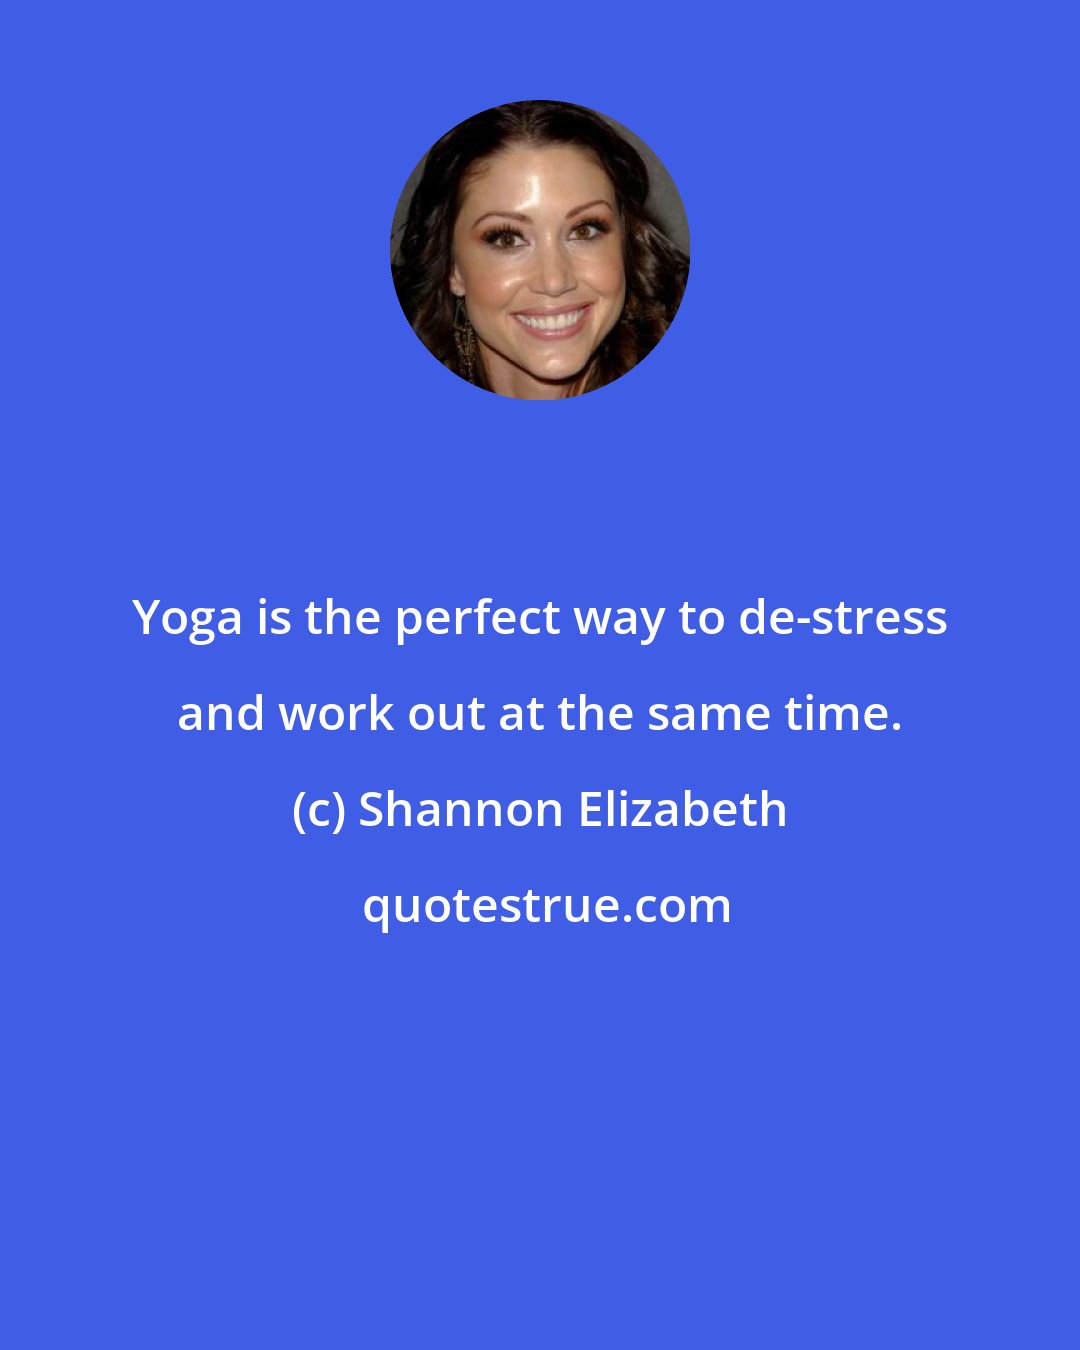 Shannon Elizabeth: Yoga is the perfect way to de-stress and work out at the same time.